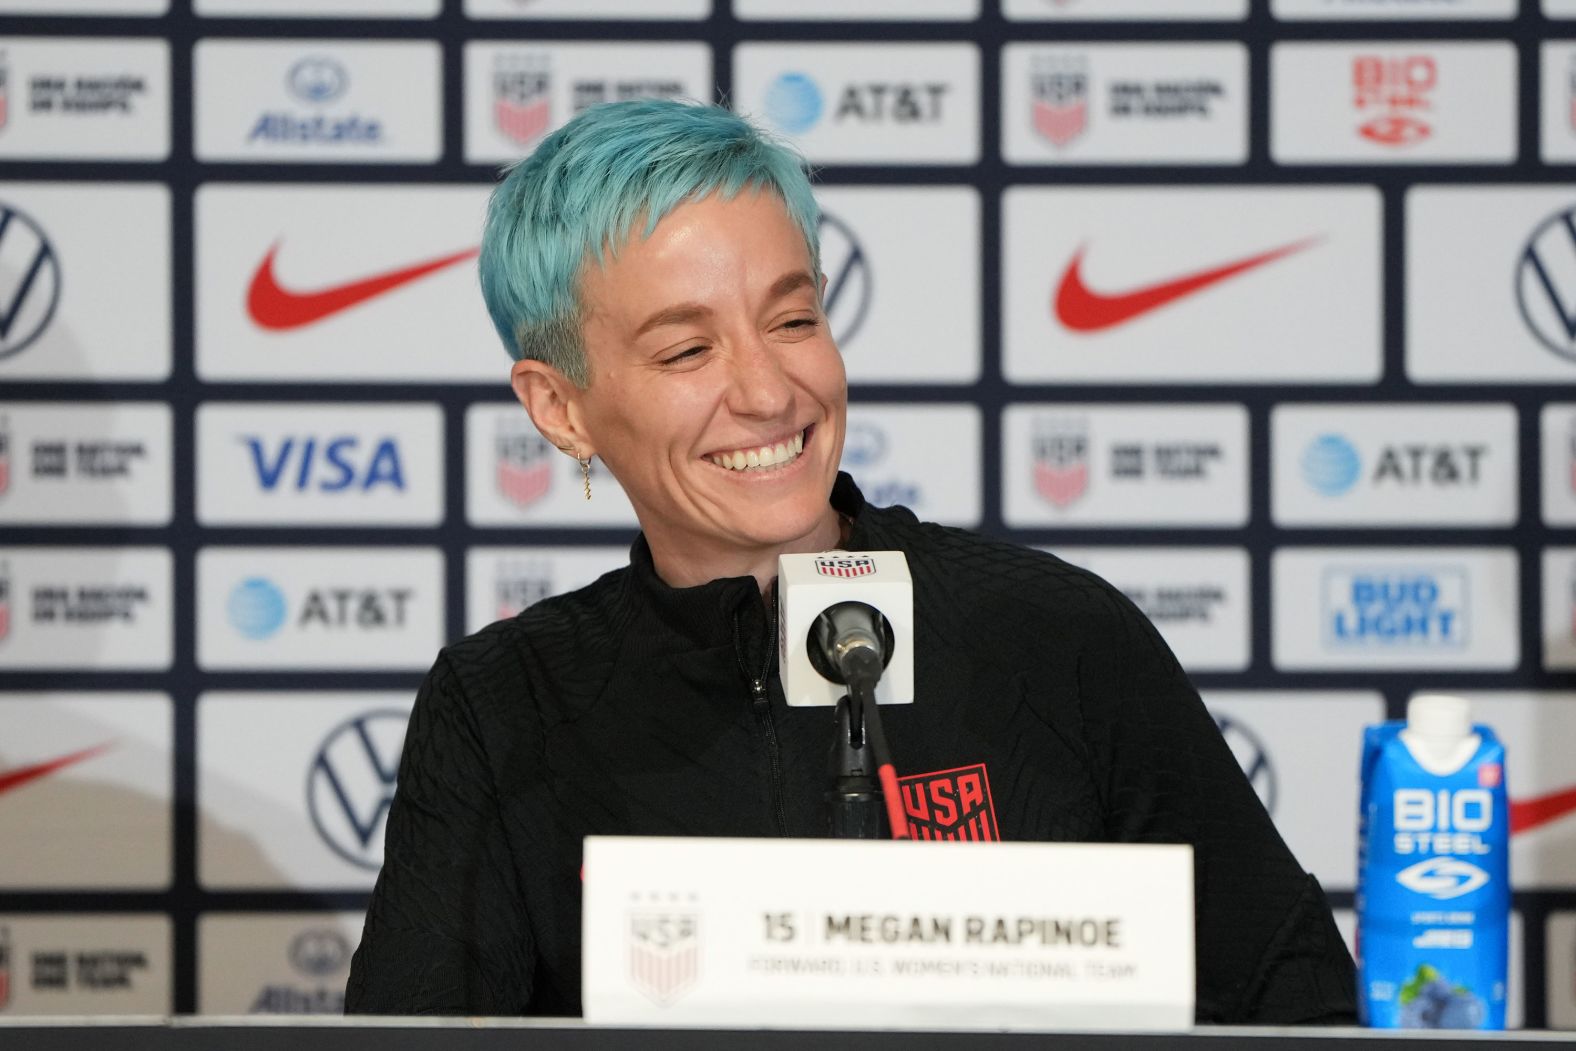 Rapinoe announces at a July 2023 news conference <a href="index.php?page=&url=https%3A%2F%2Fwww.cnn.com%2F2023%2F07%2F08%2Ffootball%2Fmegan-rapinoe-announces-retirement-spt-intl%2Findex.html" target="_blank">that she will retire at the end of the season</a>.